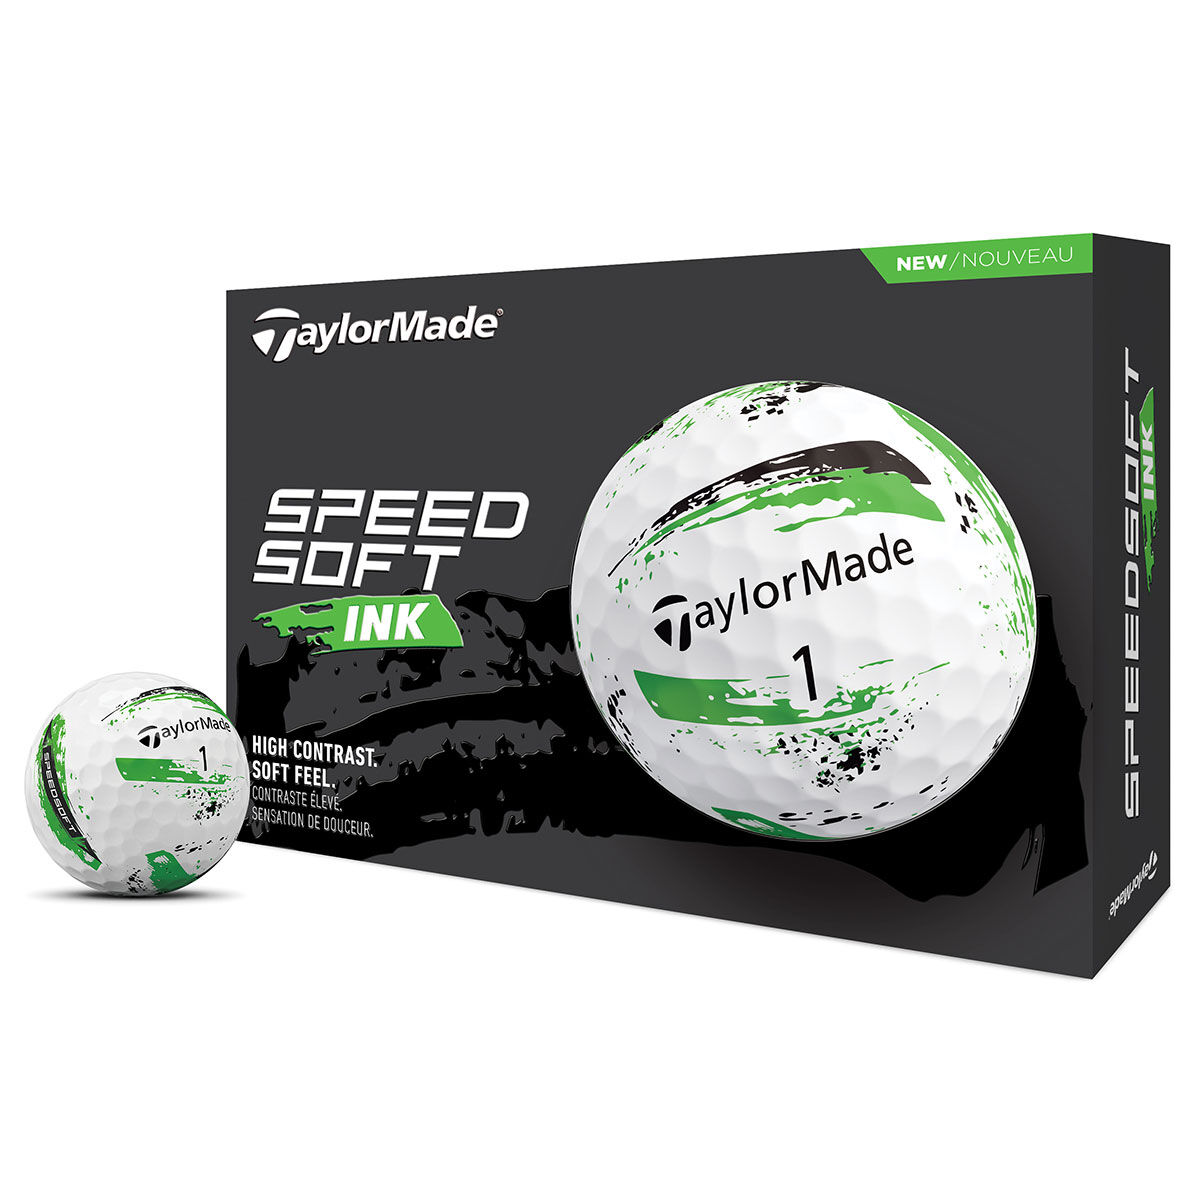 TaylorMade SpeedSoft Ink 12 Golf Ball Pack, Mens, Green, One Size | American Golf von TaylorMade